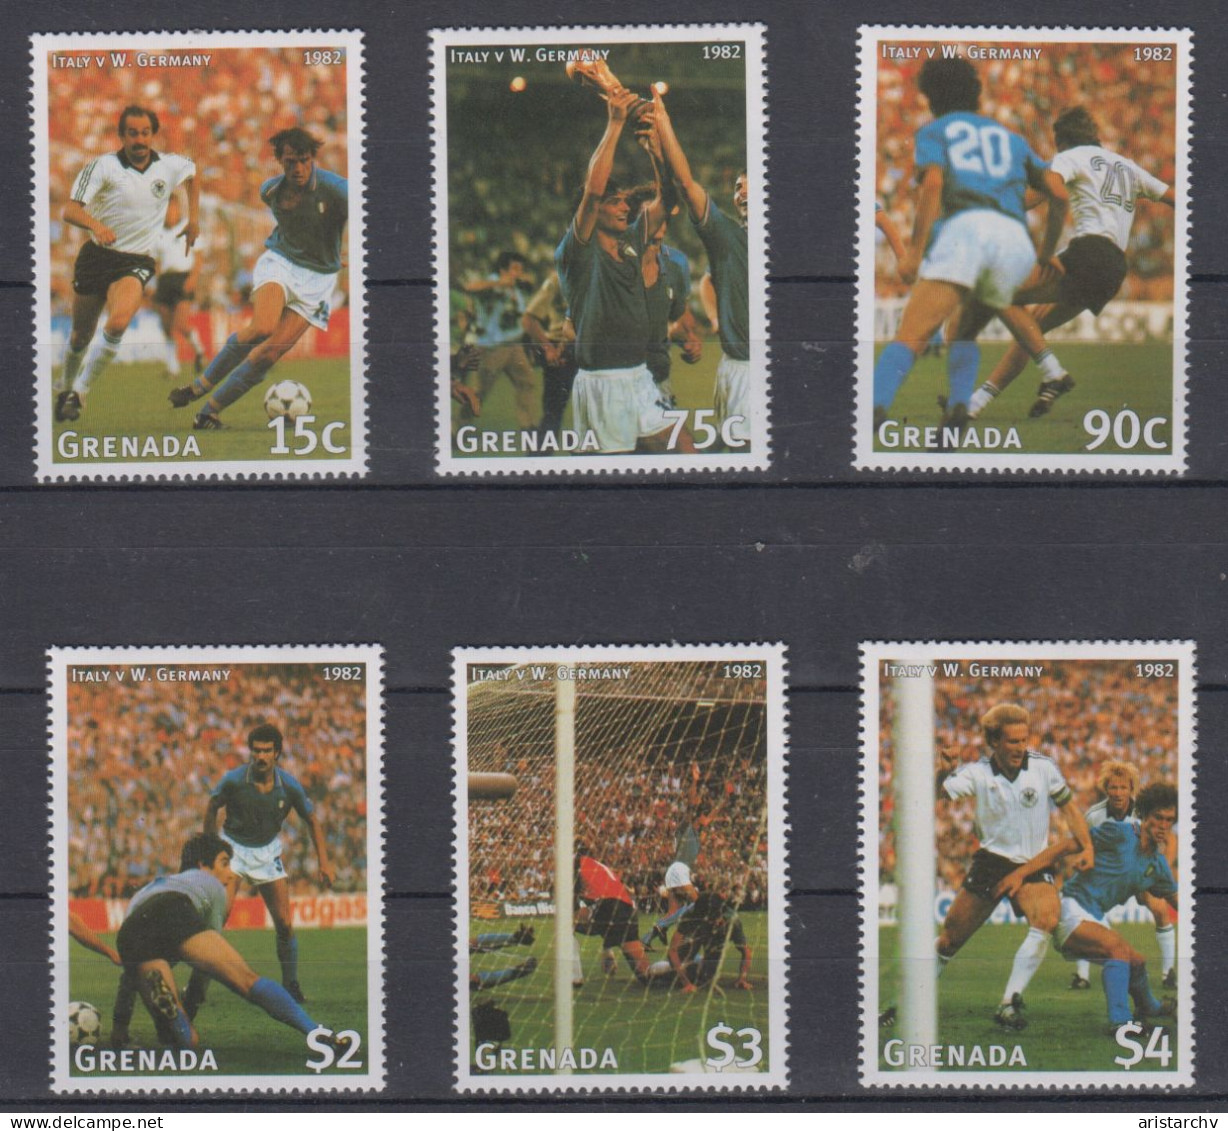 GRENADA 1998 FOOTBALL WORLD CUP 2 S/SHEETS 2 SHEETLETS AND 6 STAMPS - 1998 – France